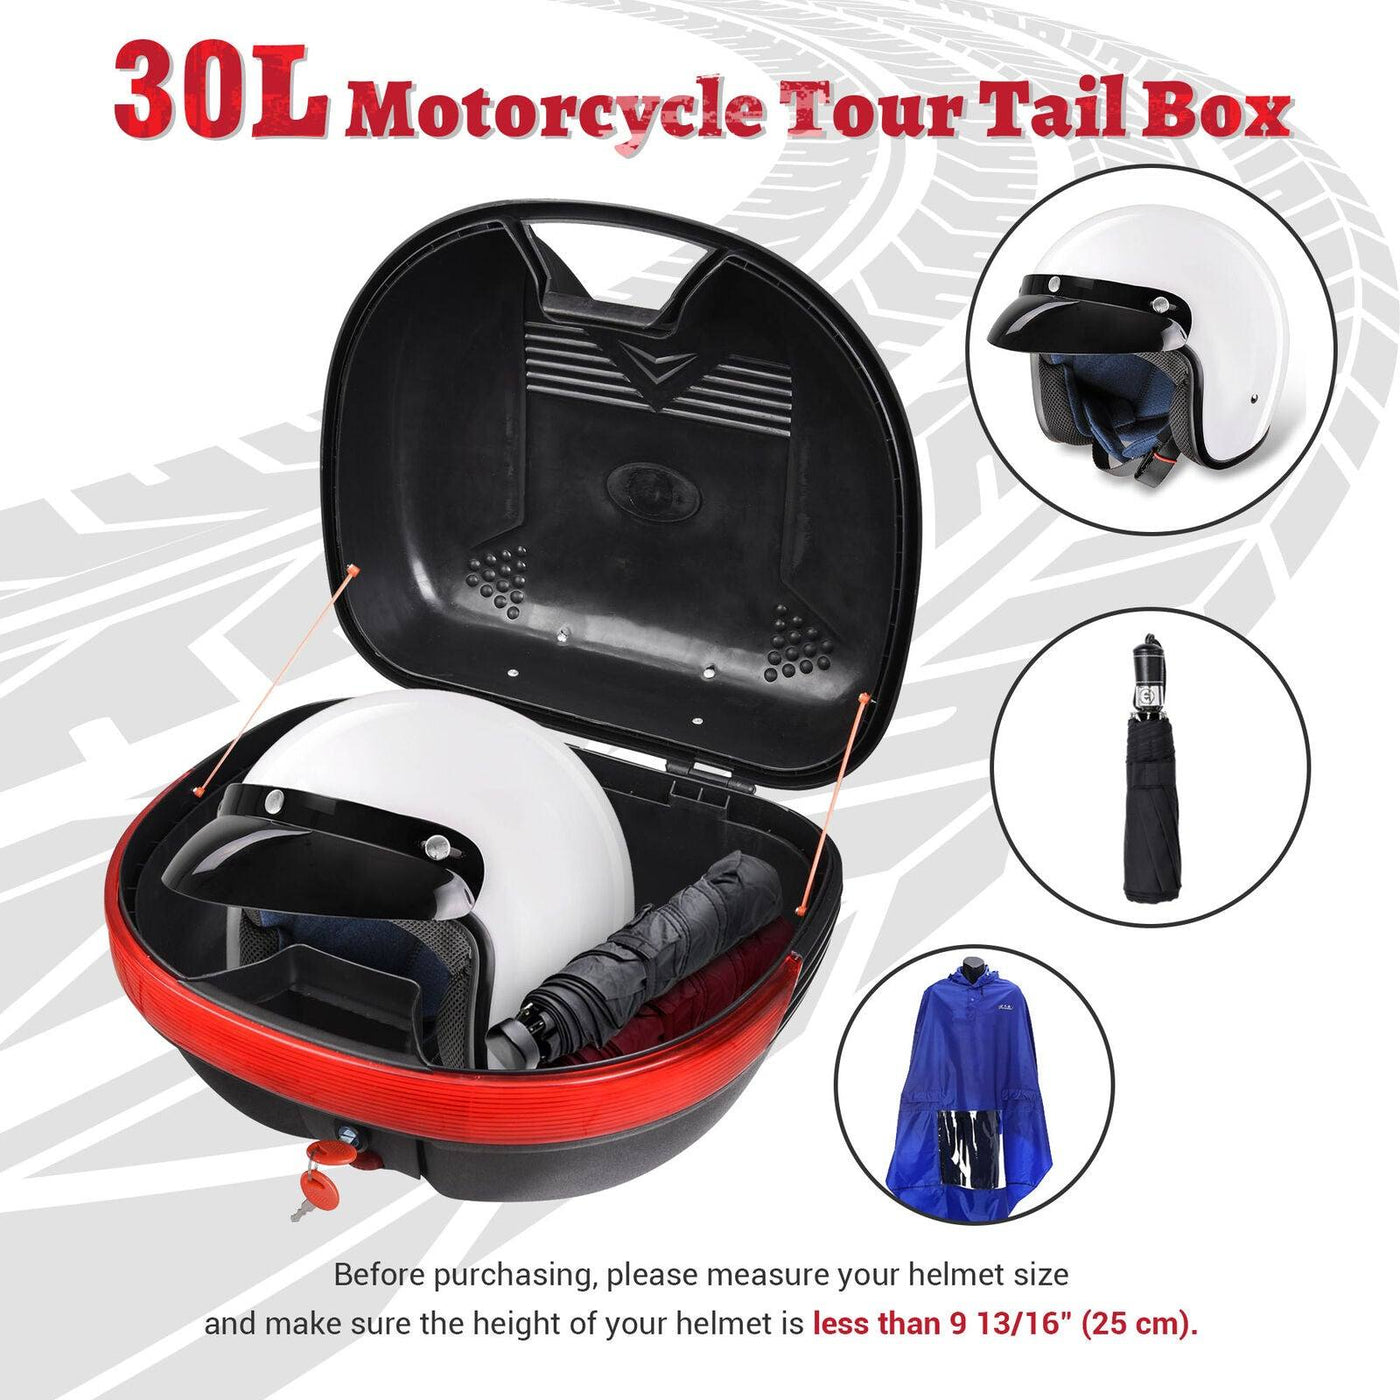 30L Motorcycle Tour Tail Box Scooter Trunk Luggage Carrier Case Top Lock Storage - Moto Life Products